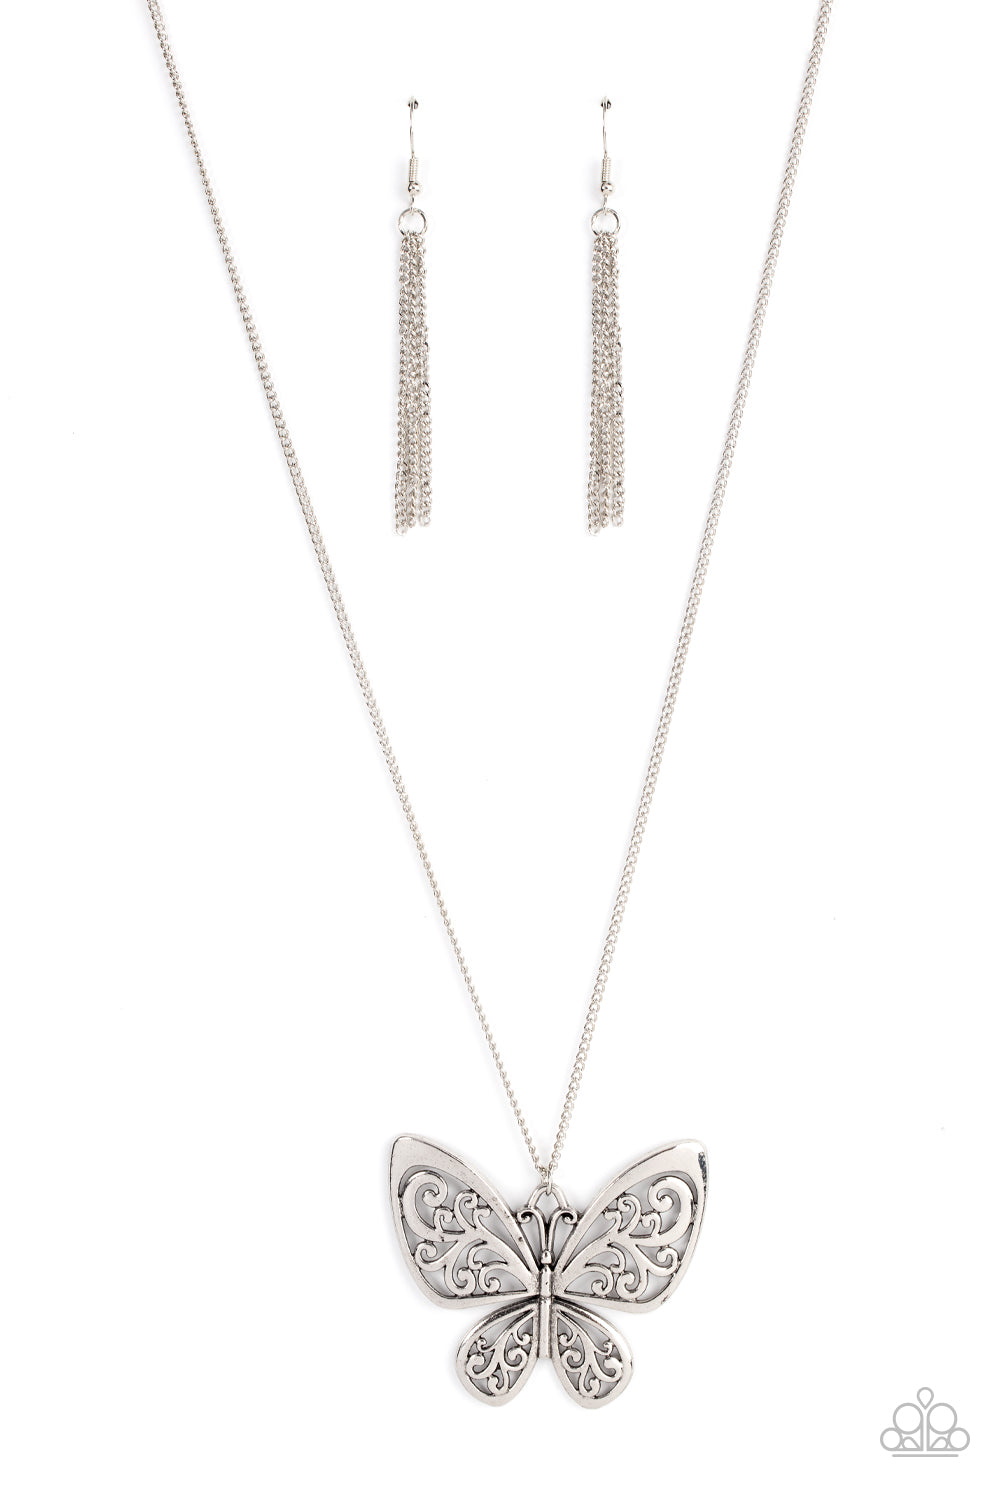 Paparazzi Necklace - Butterfly Boutique - Silver